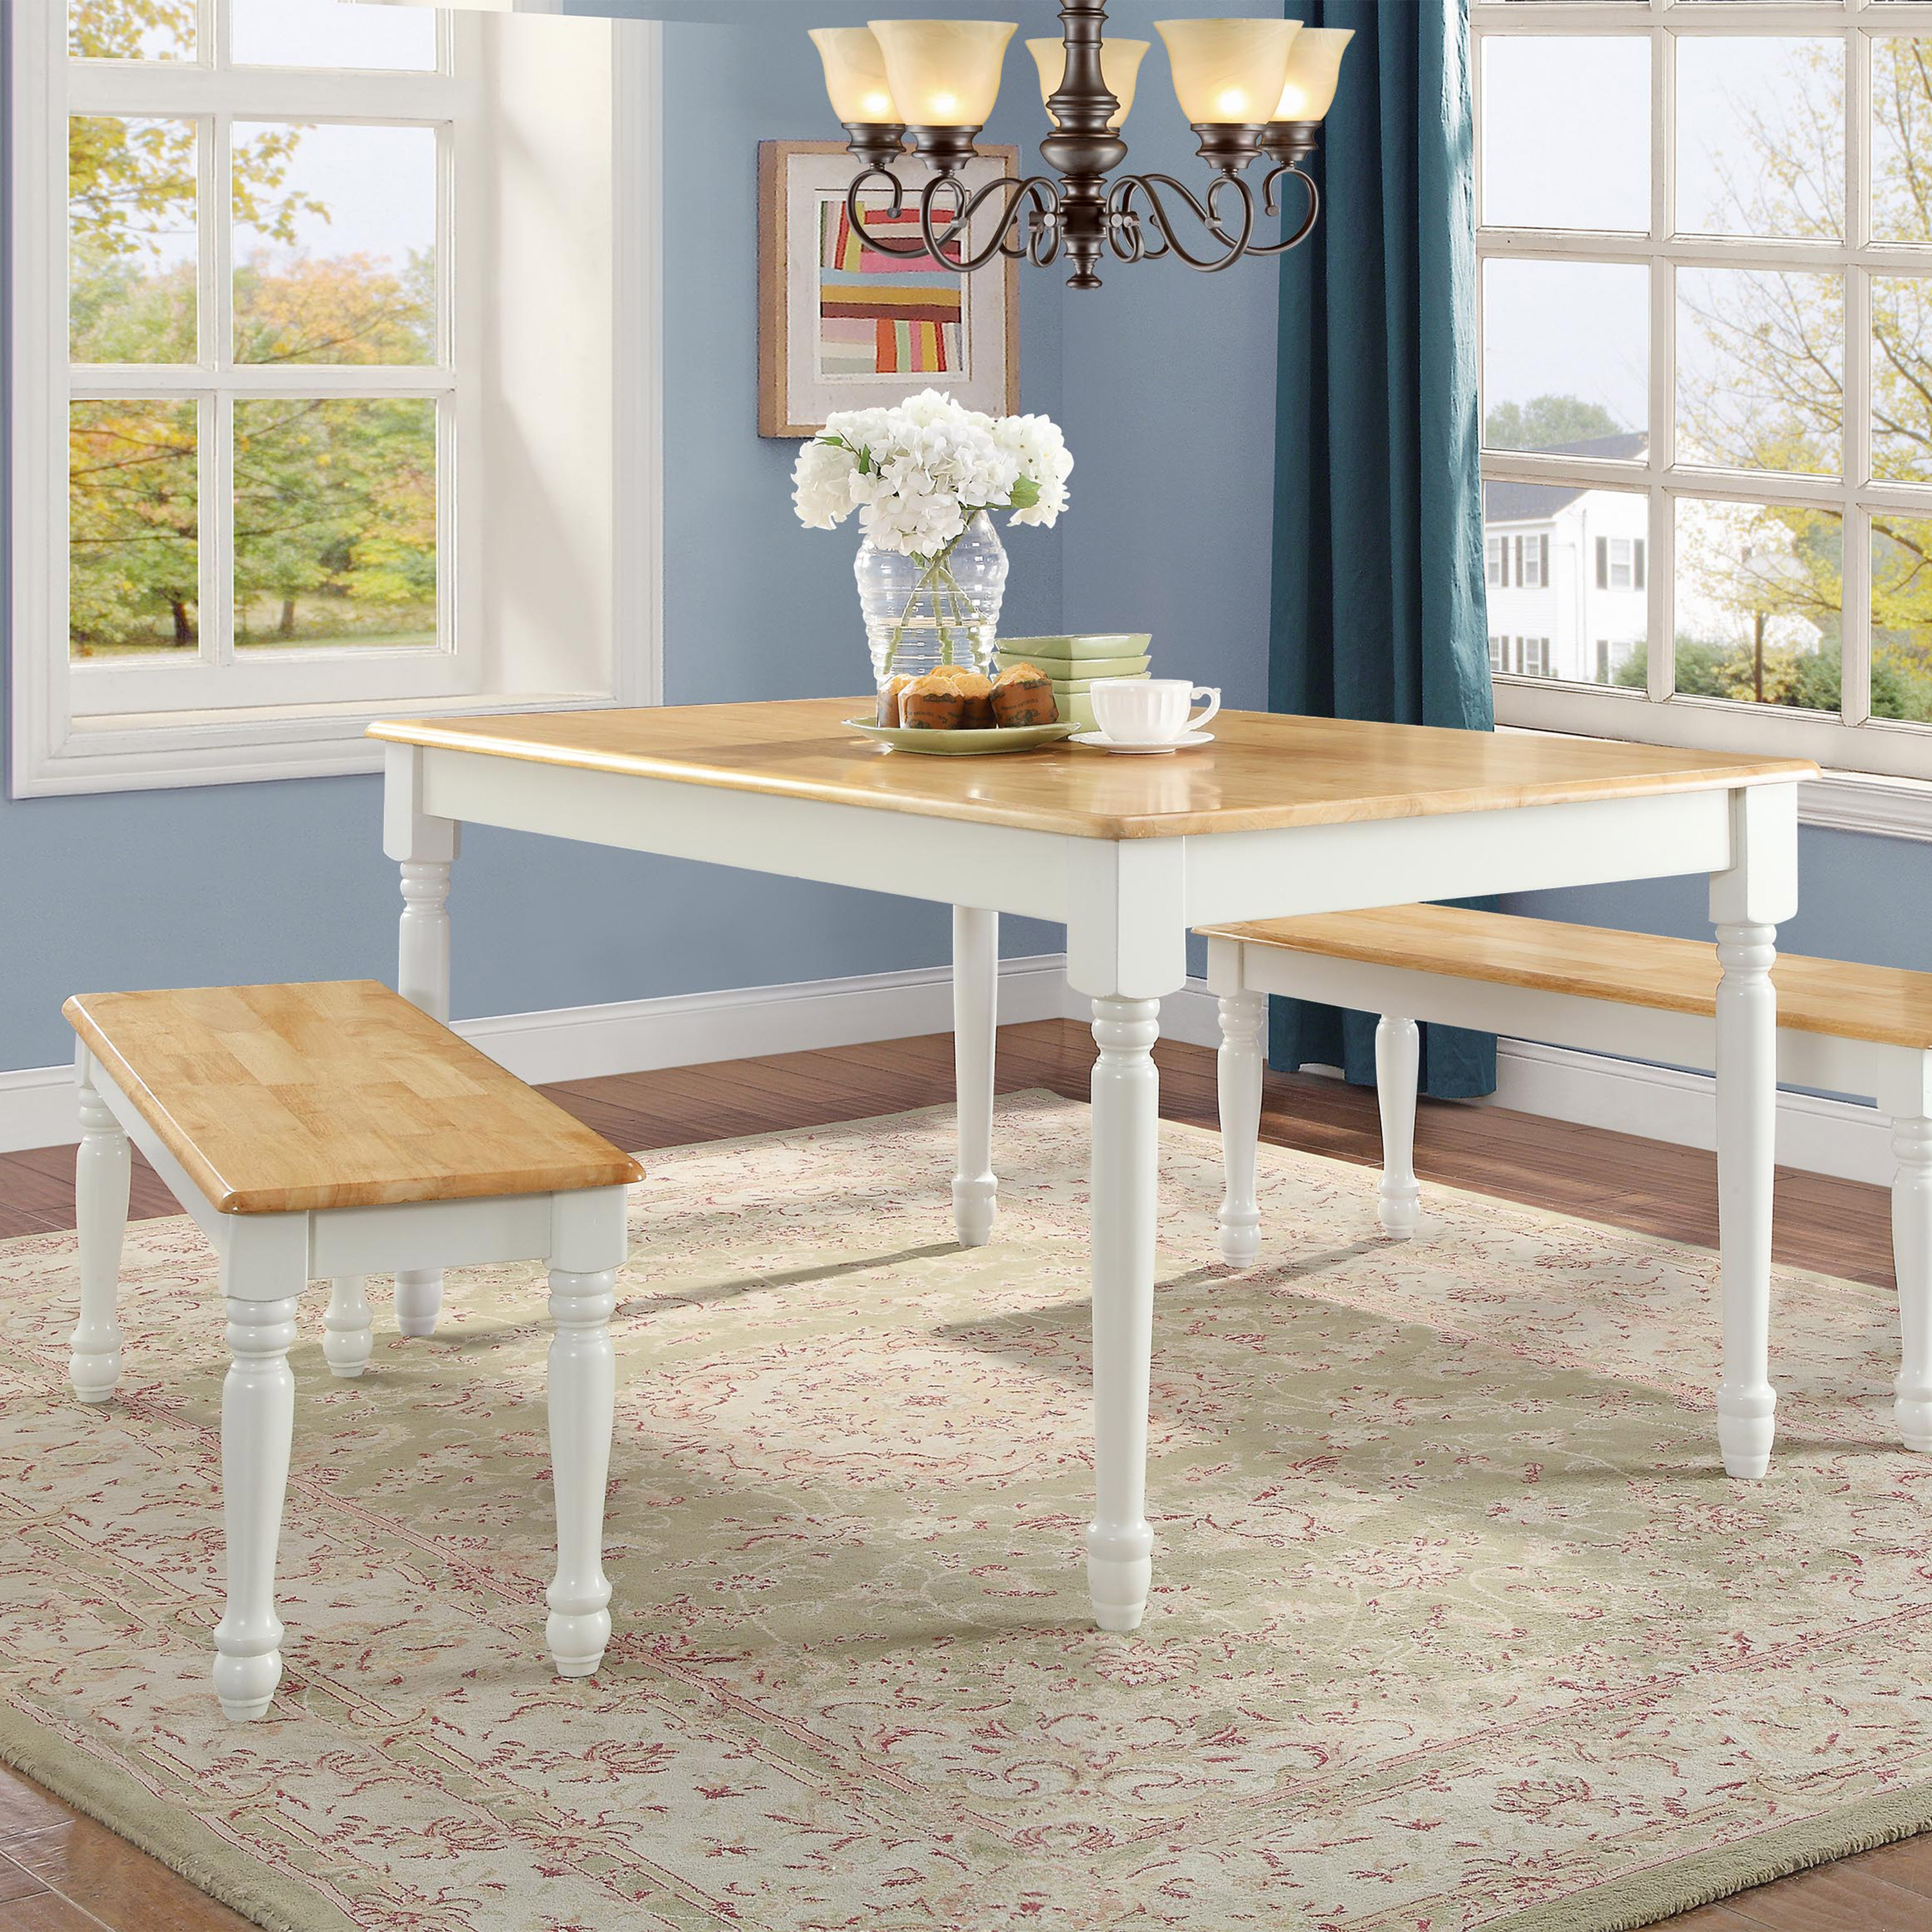 Better Homes & Gardens Autumn Lane Farmhouse Solid Wood Dining Bench, White and Natural Finish - image 3 of 6